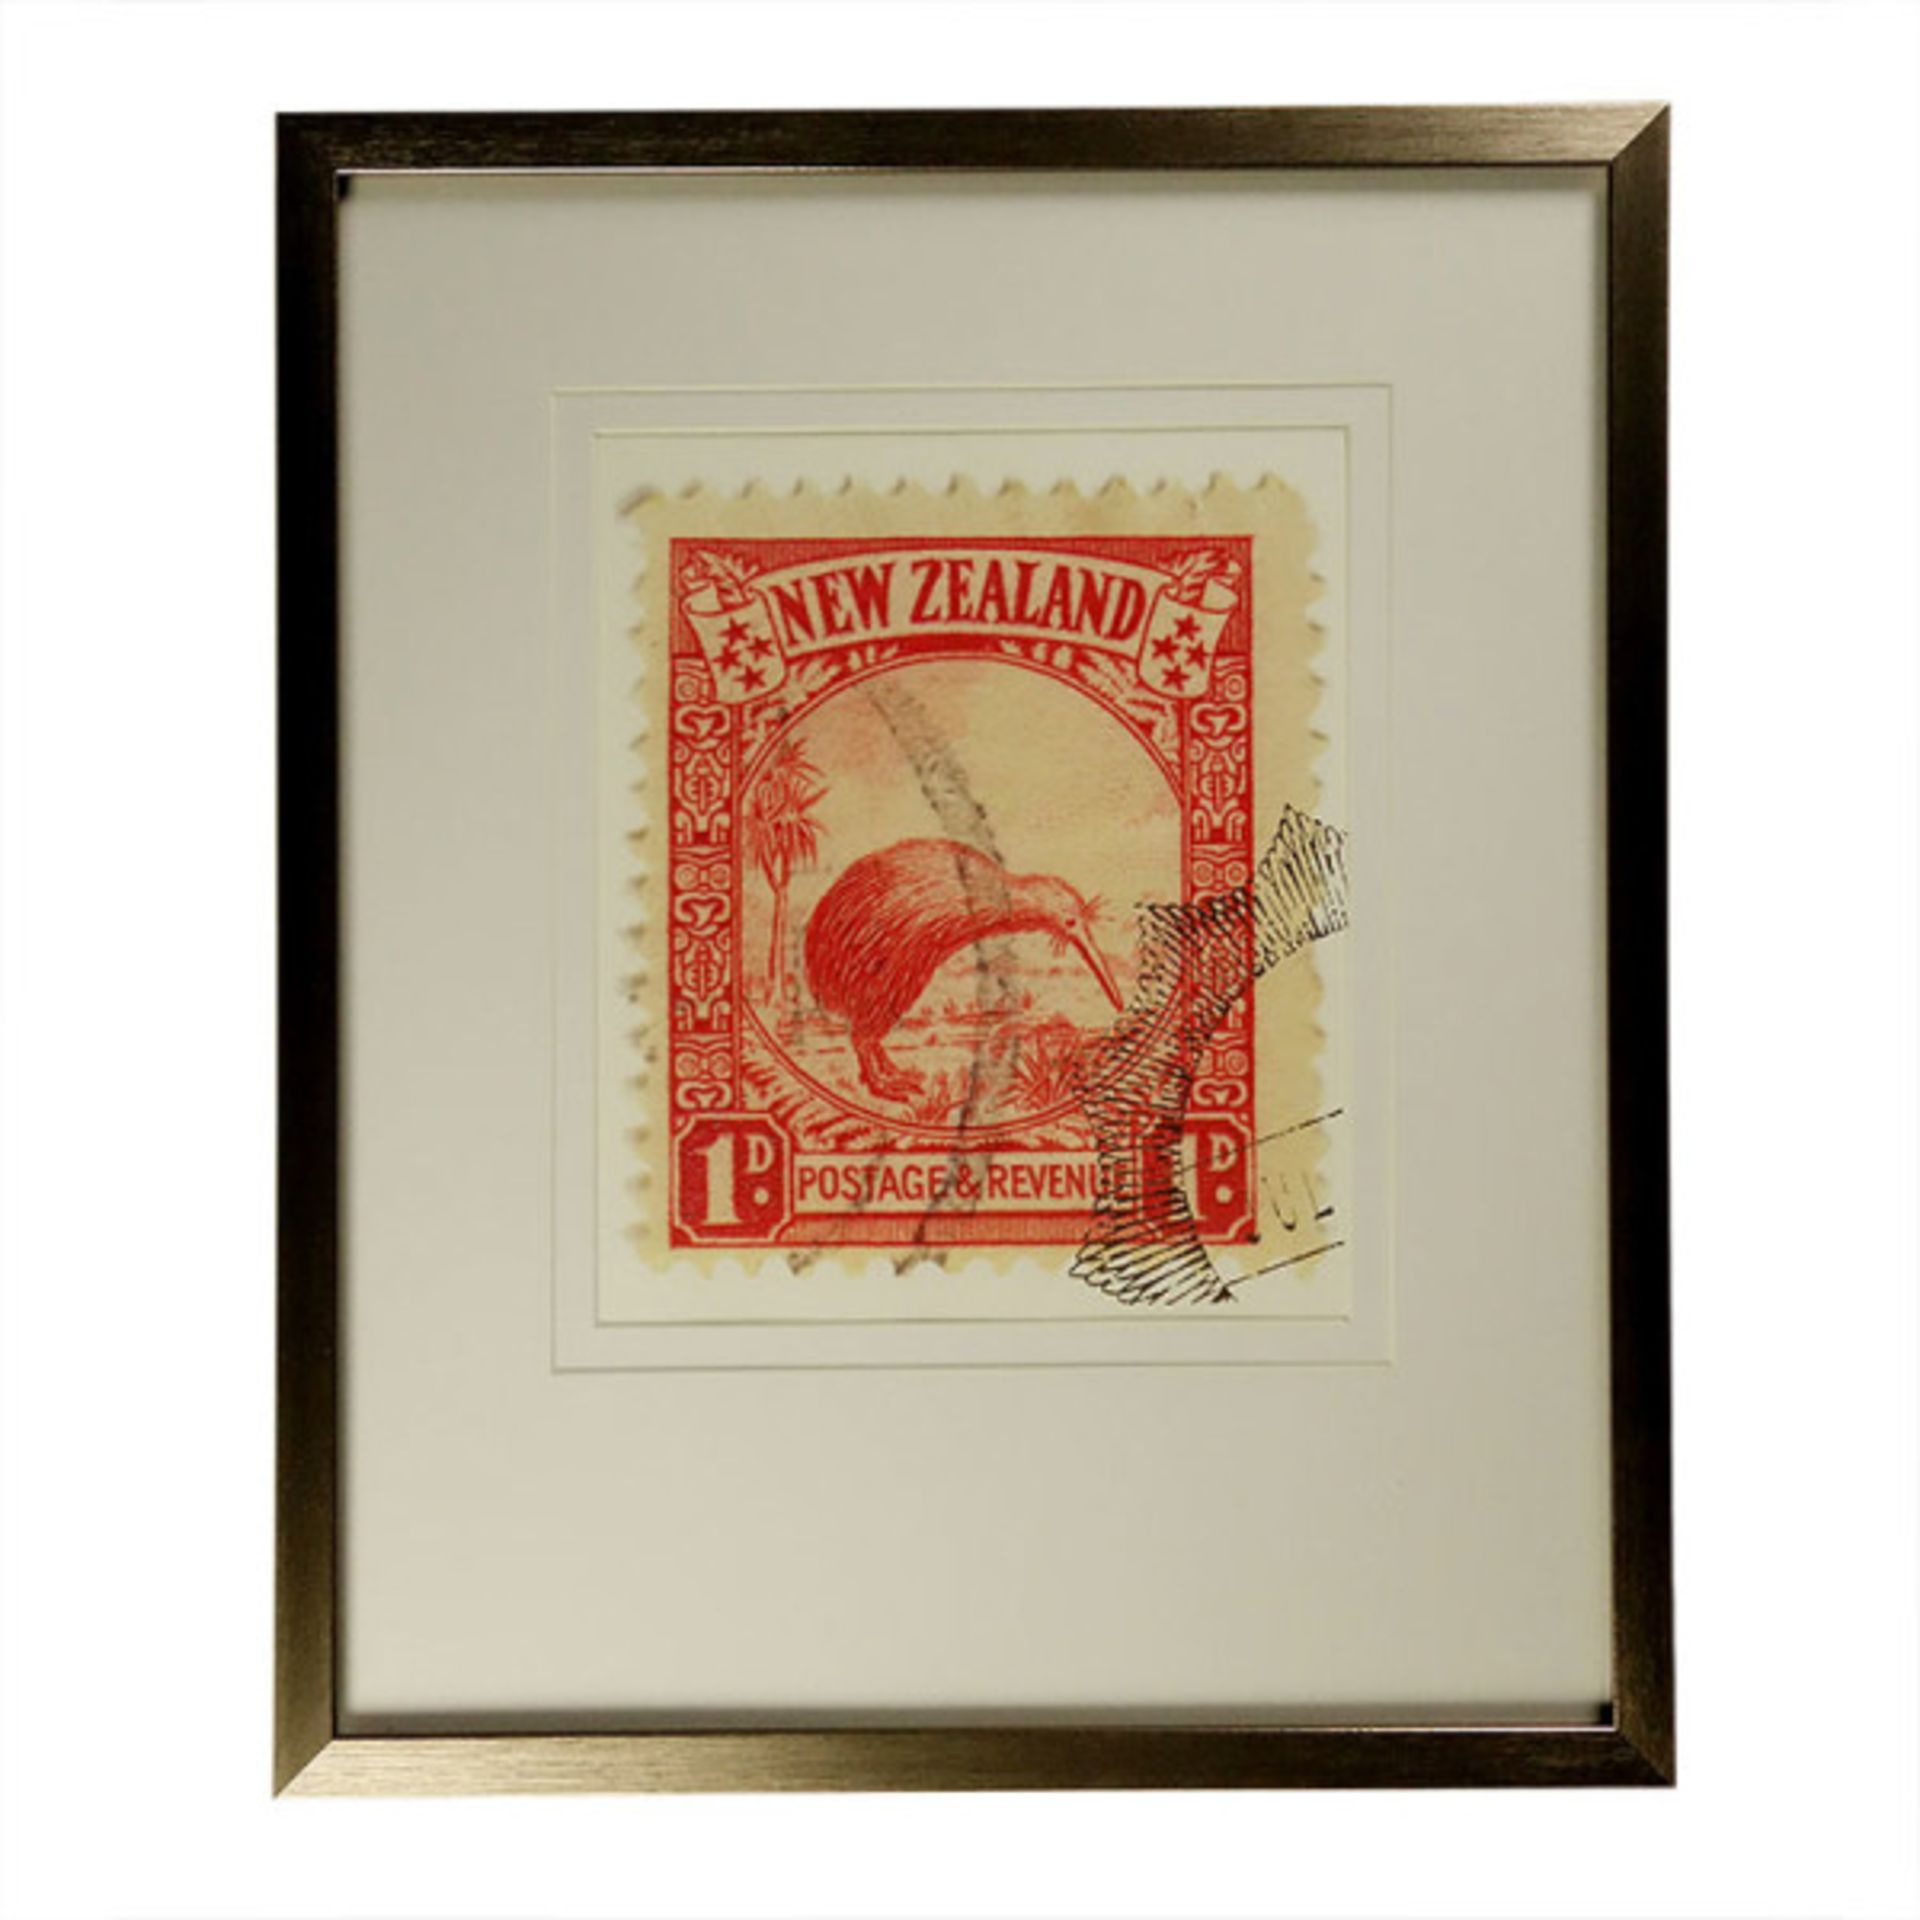 Coup & Co Art Postage Stamp New Zealand Kiwi - carton dimensions 51 x 61cm Coup & Co limited edition